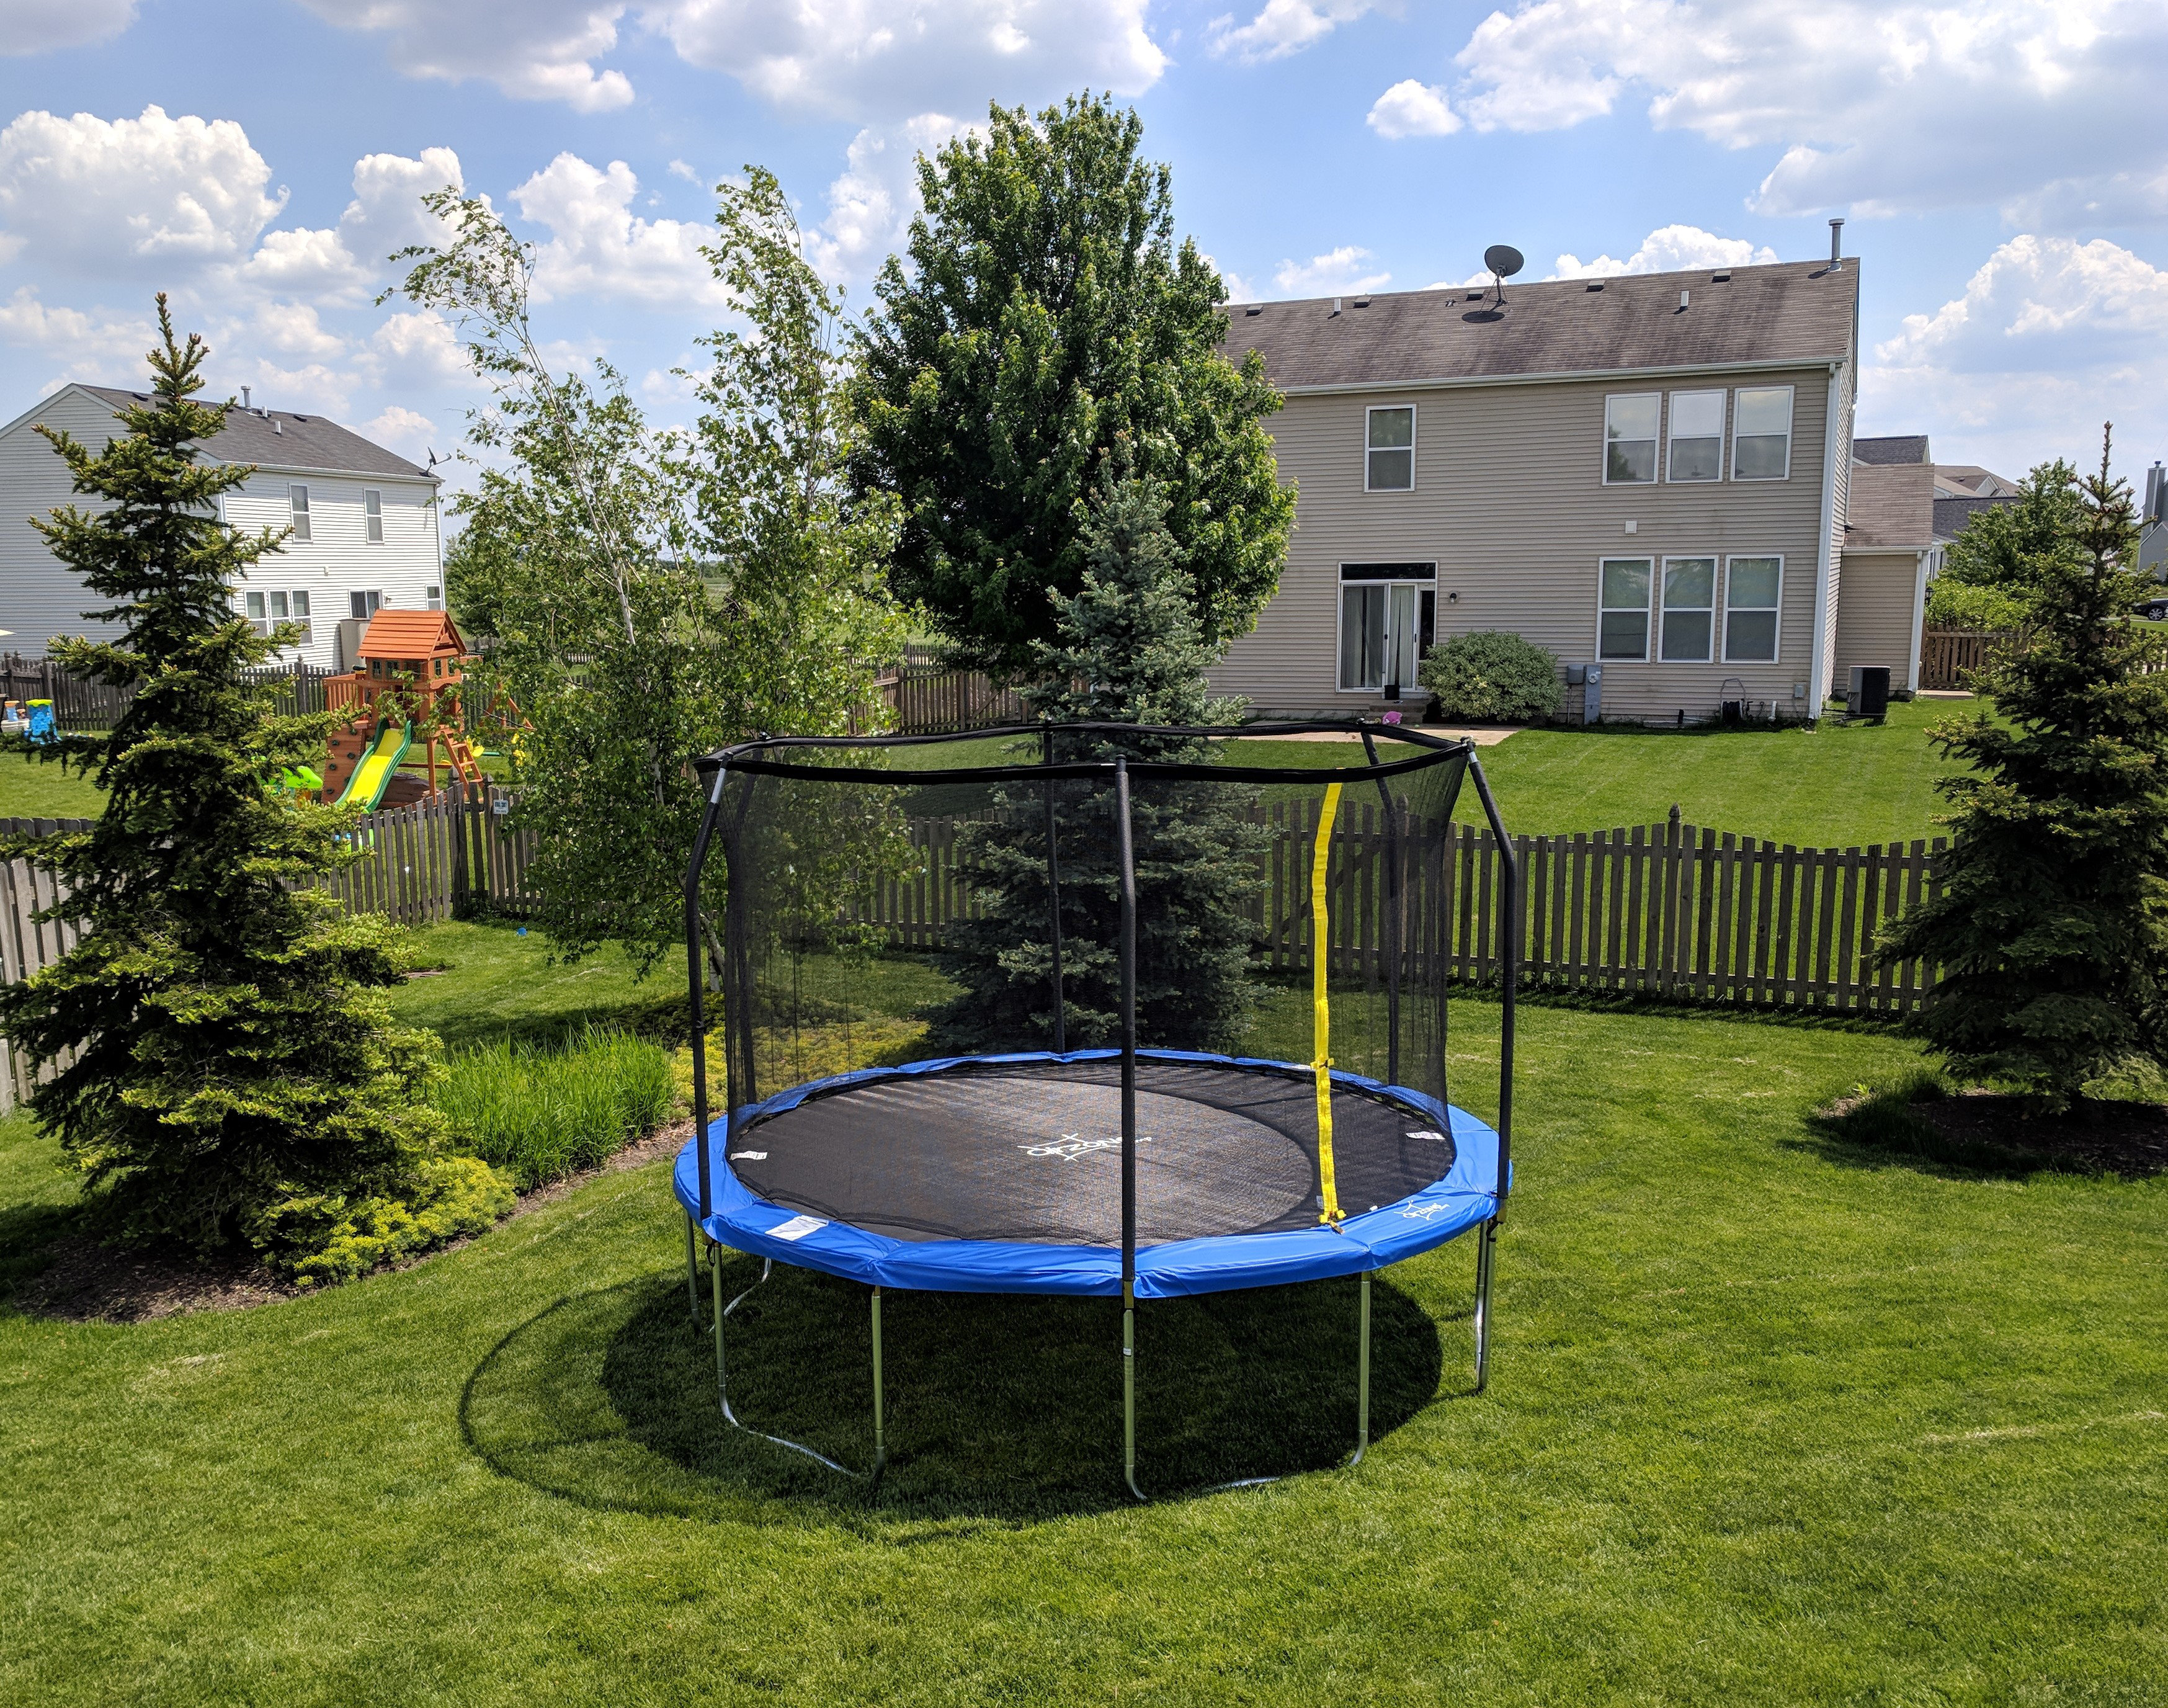 Airzone Play Backyard Jump 15 Round Trampoline With Safety Enclosure Reviews